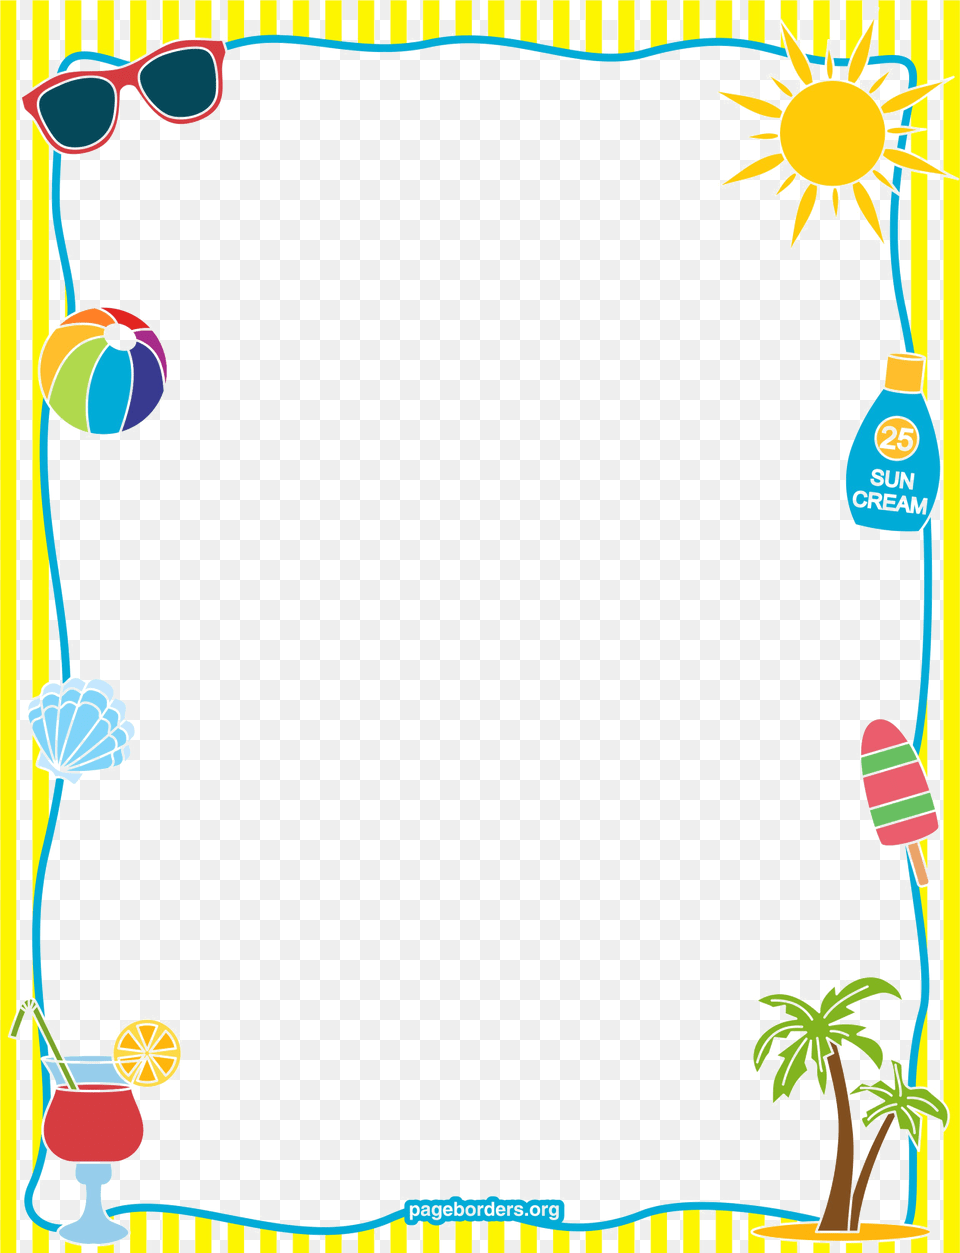 School Border Image Summer Border, Accessories, Sunglasses, Outdoors, Ball Png